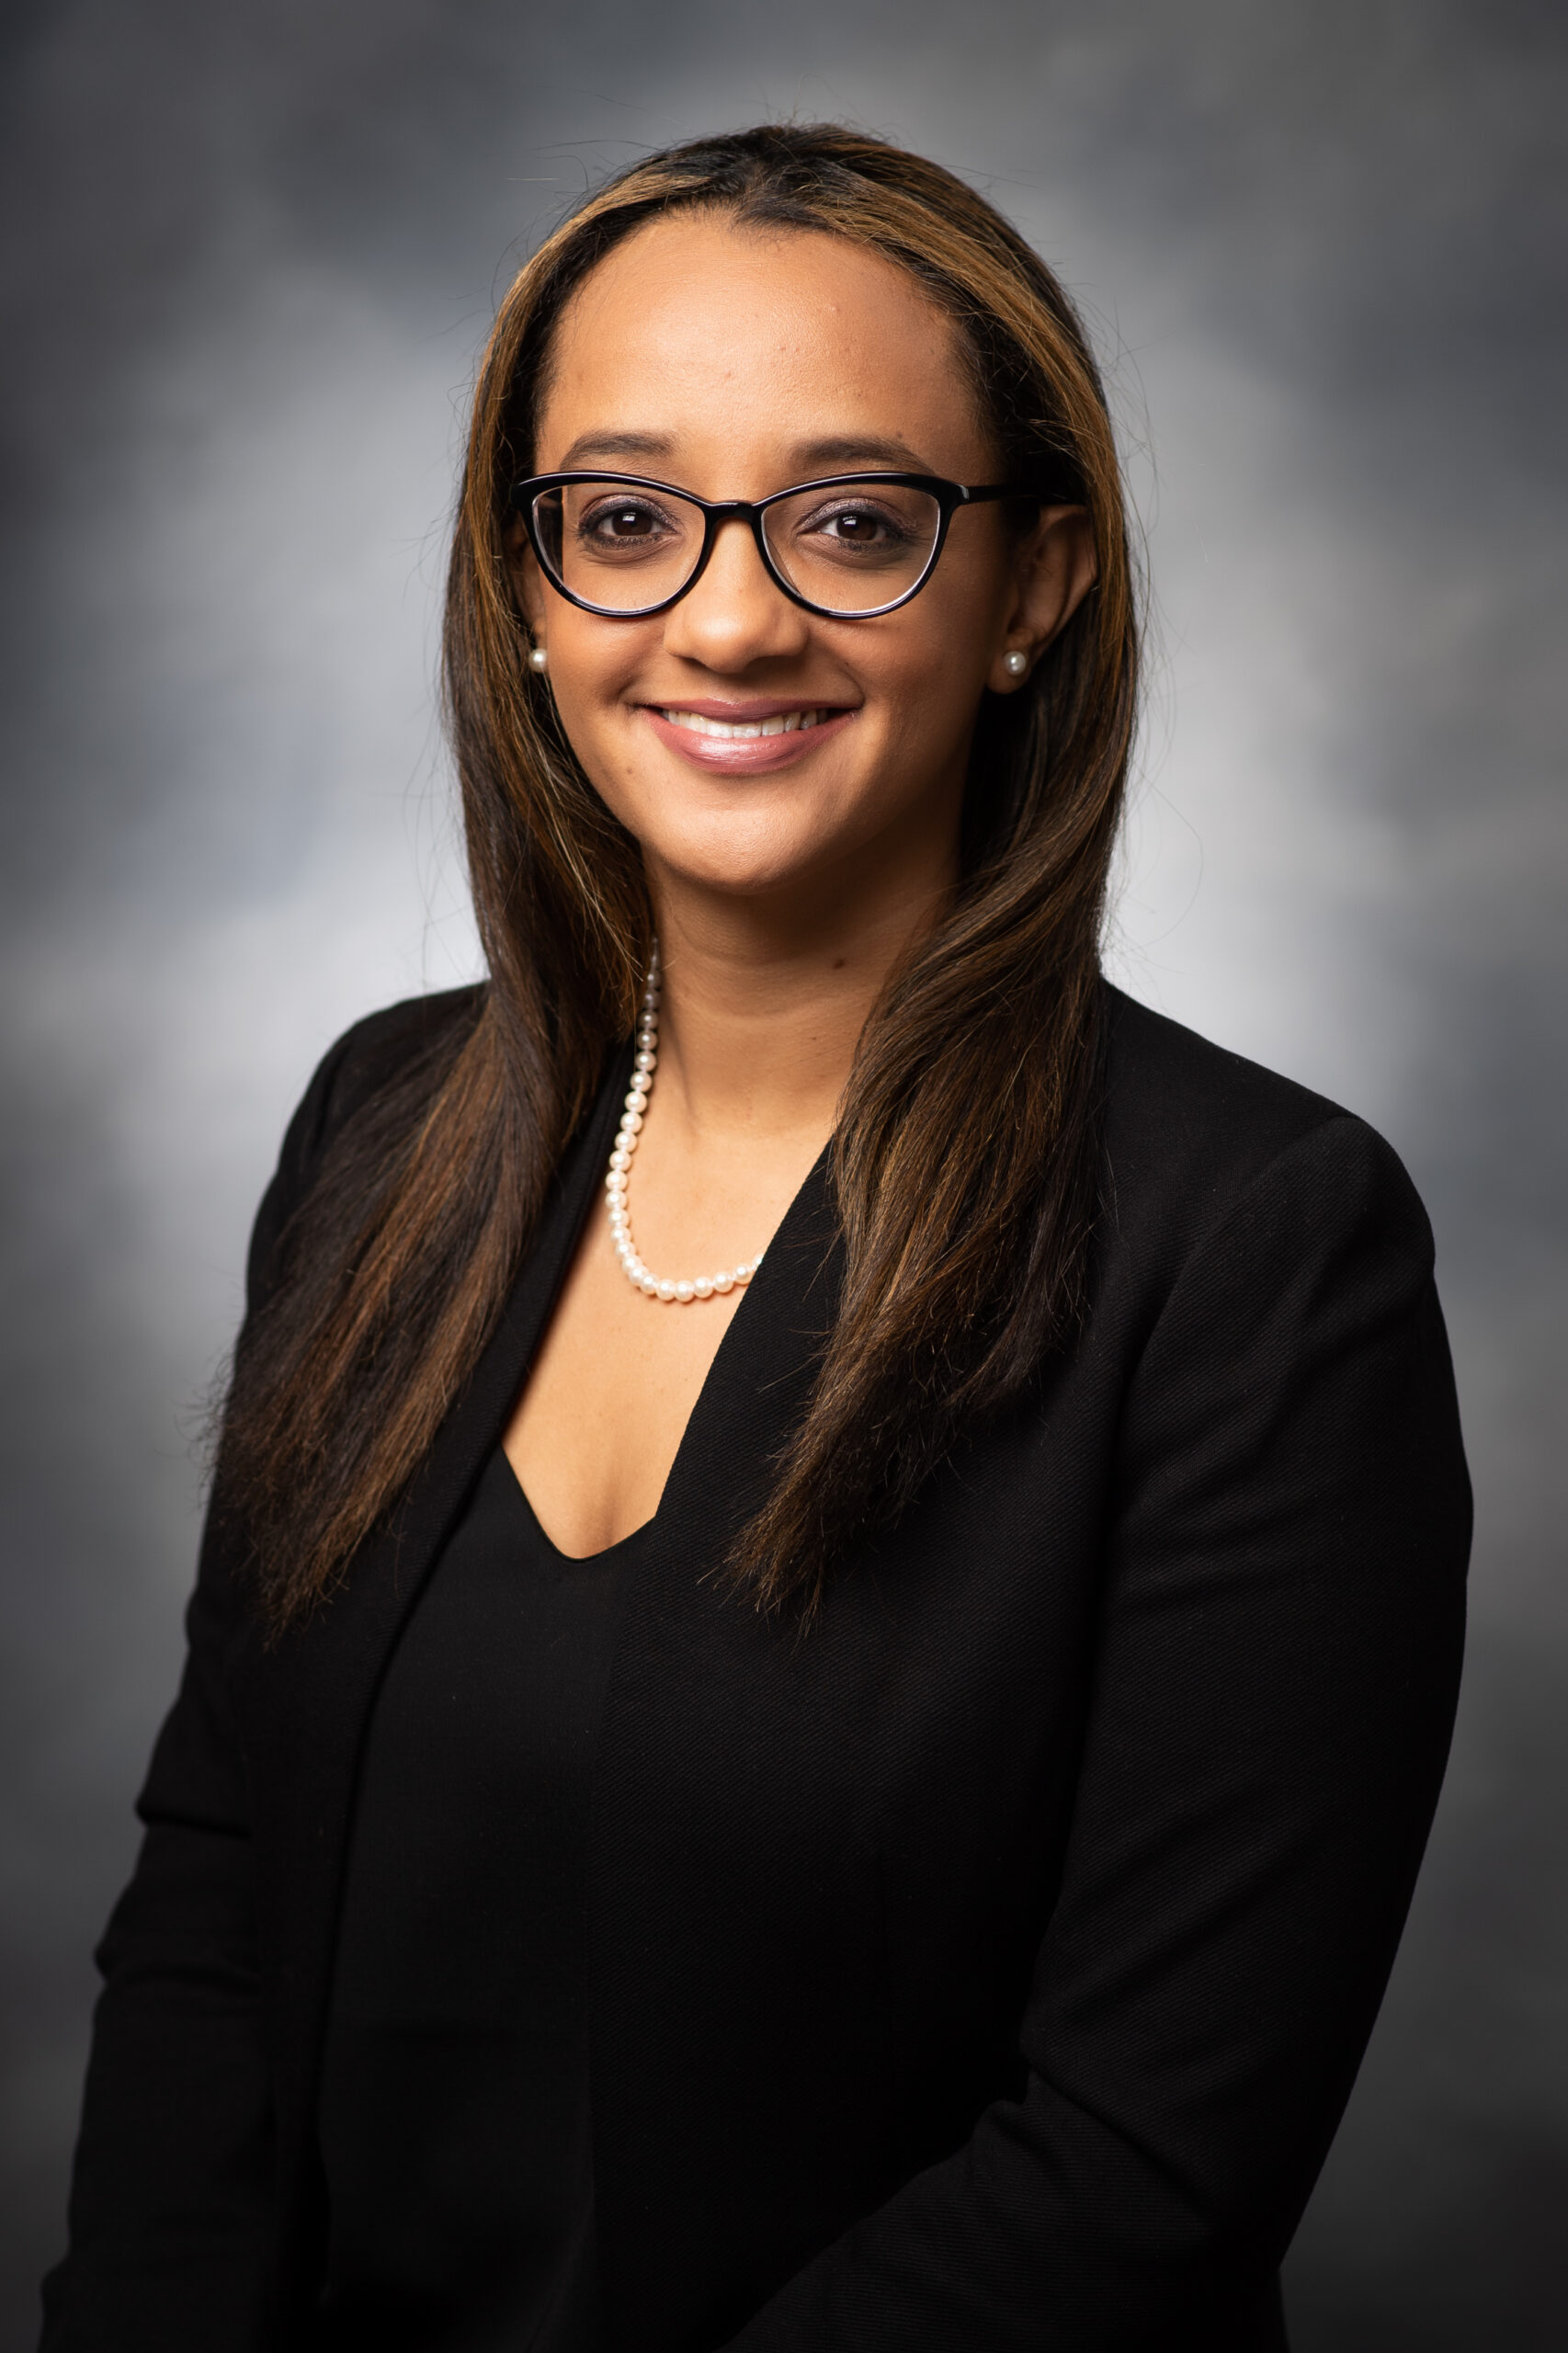 Headshot of Abeba Berhane, MD, board-certified pediatrician at the Helen DeVos Children’s Hospital in Grand Rapids and assistant professor at the Michigan State University College of Human Medicine